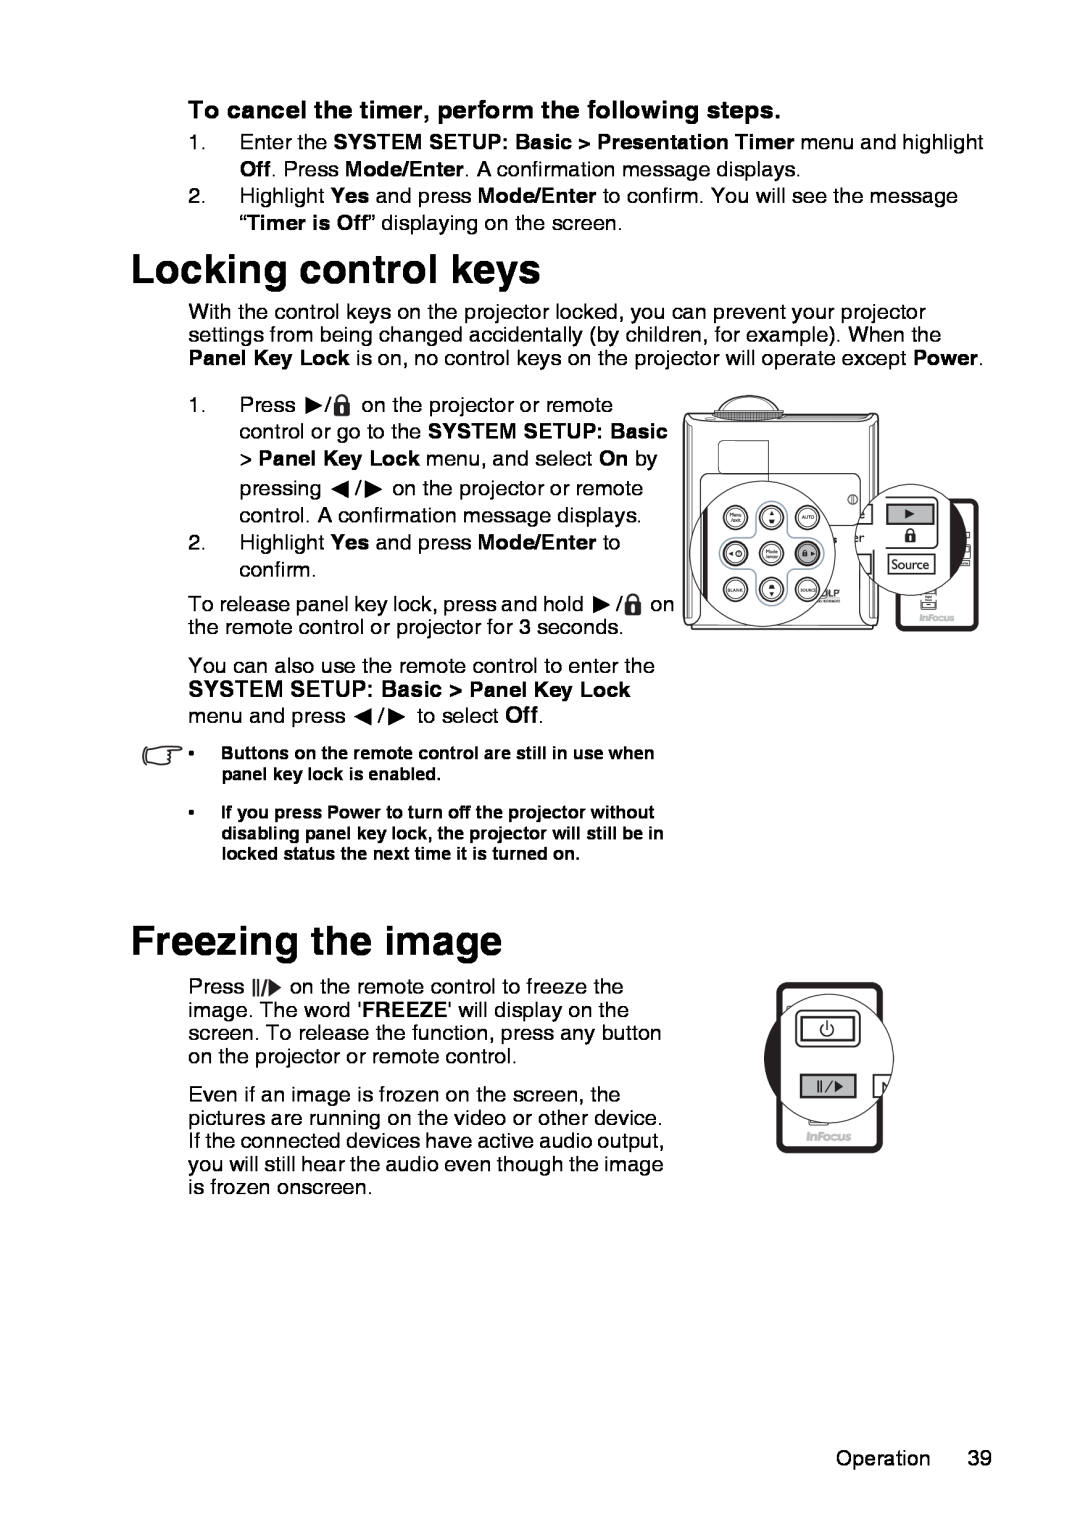 InFocus XS1 manual Locking control keys, Freezing the image, To cancel the timer, perform the following steps 